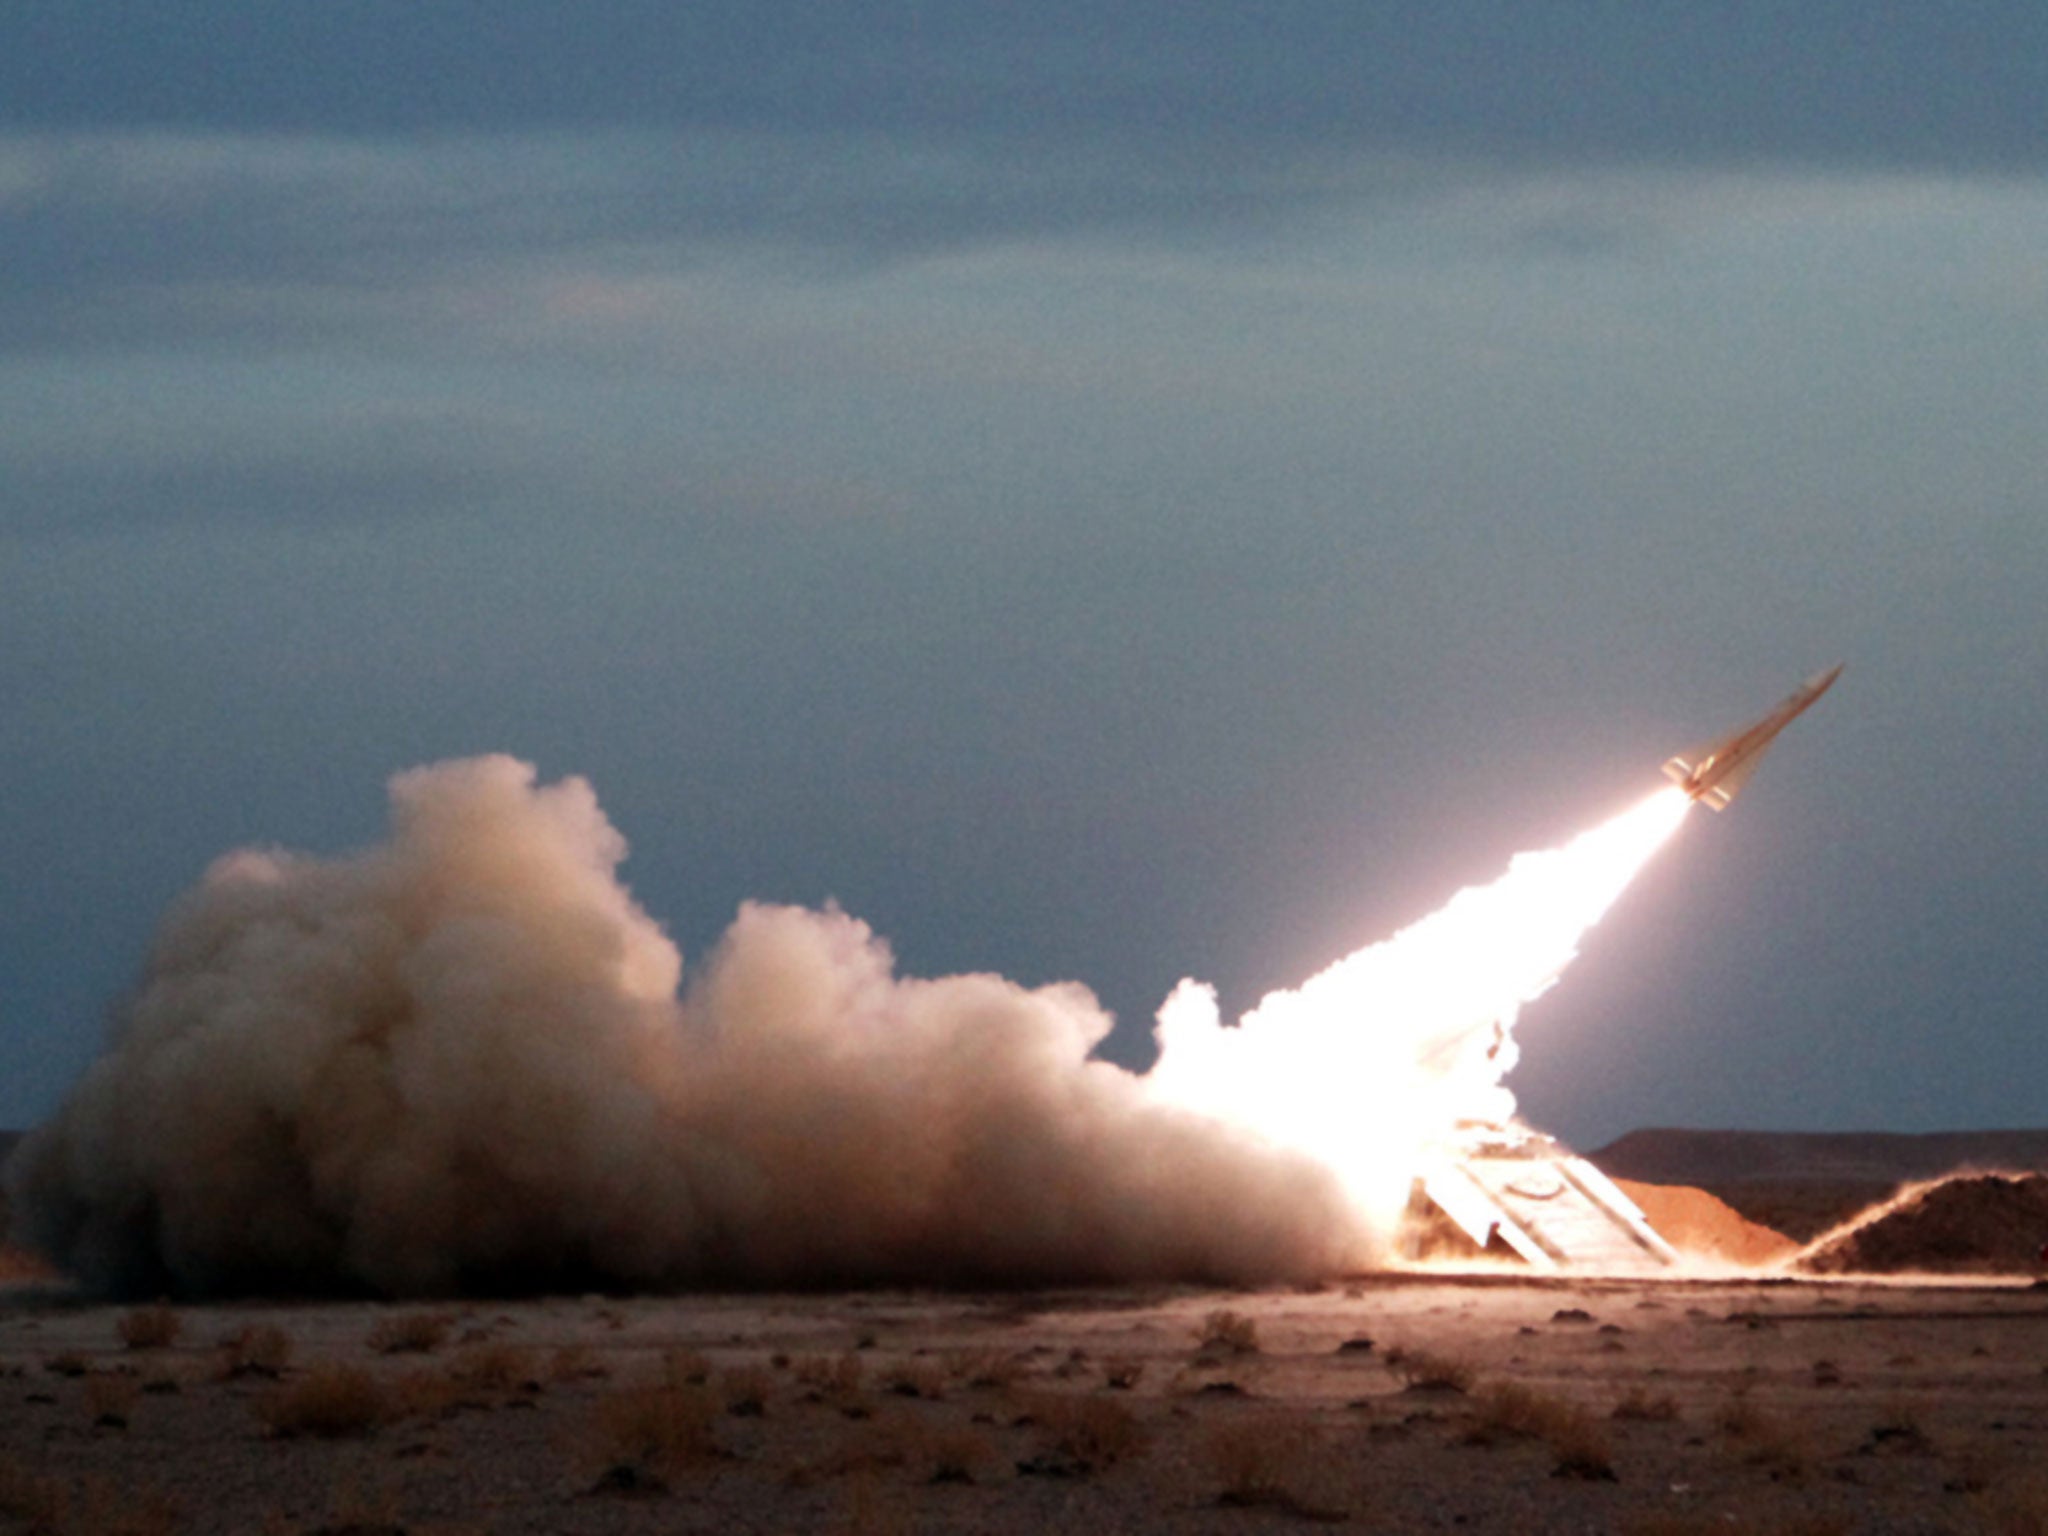 A Hawk surface-to-air missile is launched during military maneuvers at an undisclosed location in Iran on November 13, 2012.